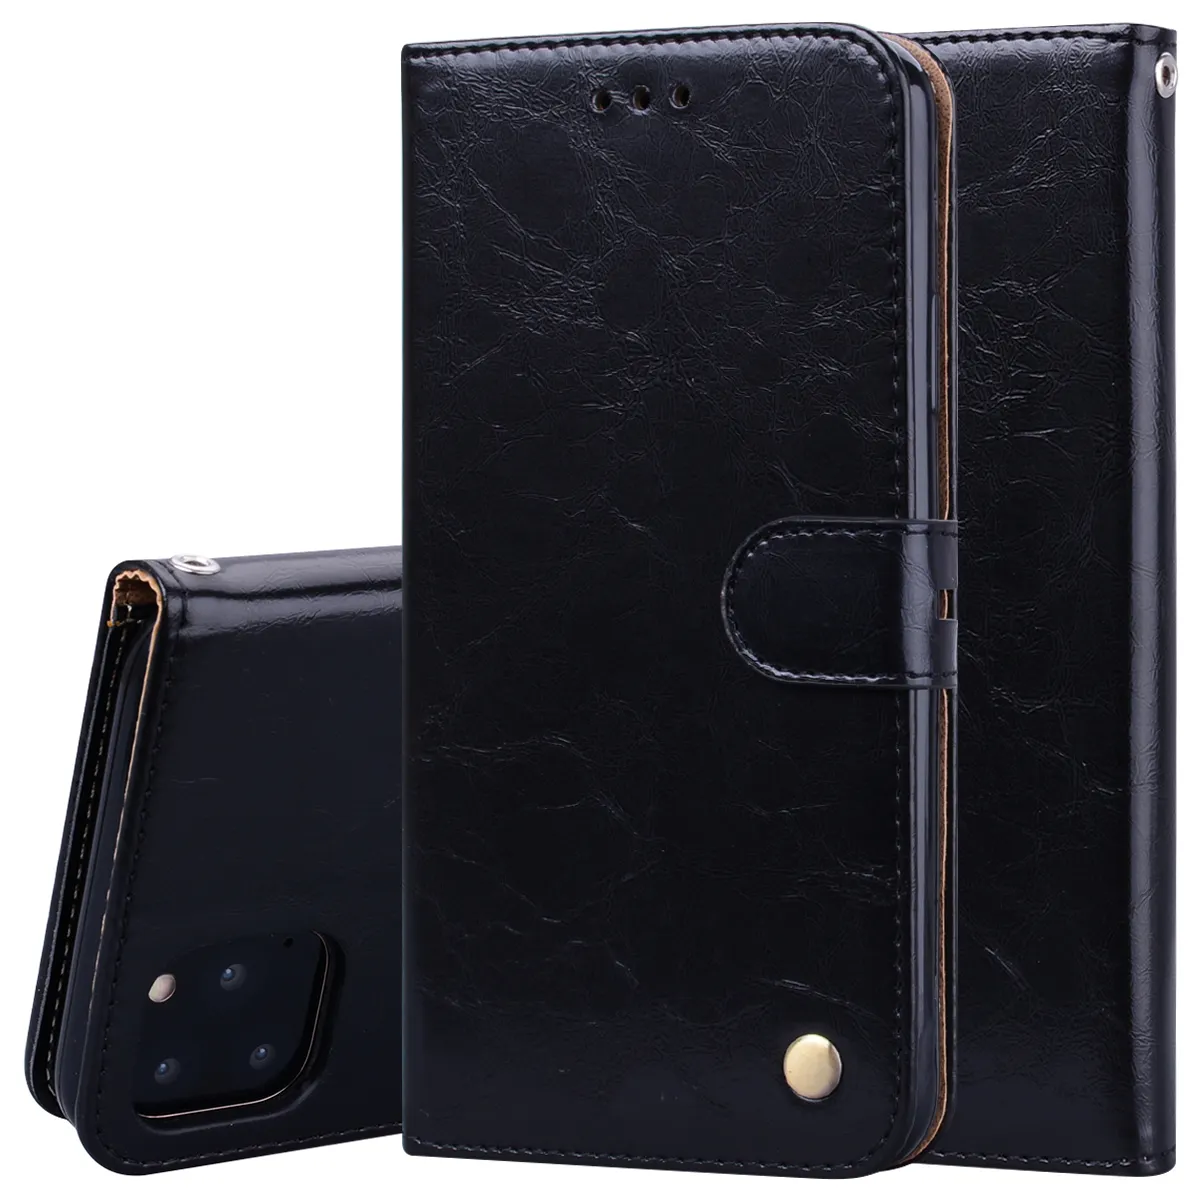 Case Phone LeatherフリップFor iPhone 12、Factory PriceカバーFor iPhone 11プロXS XR XS MAX Mobile Phone Leather Case